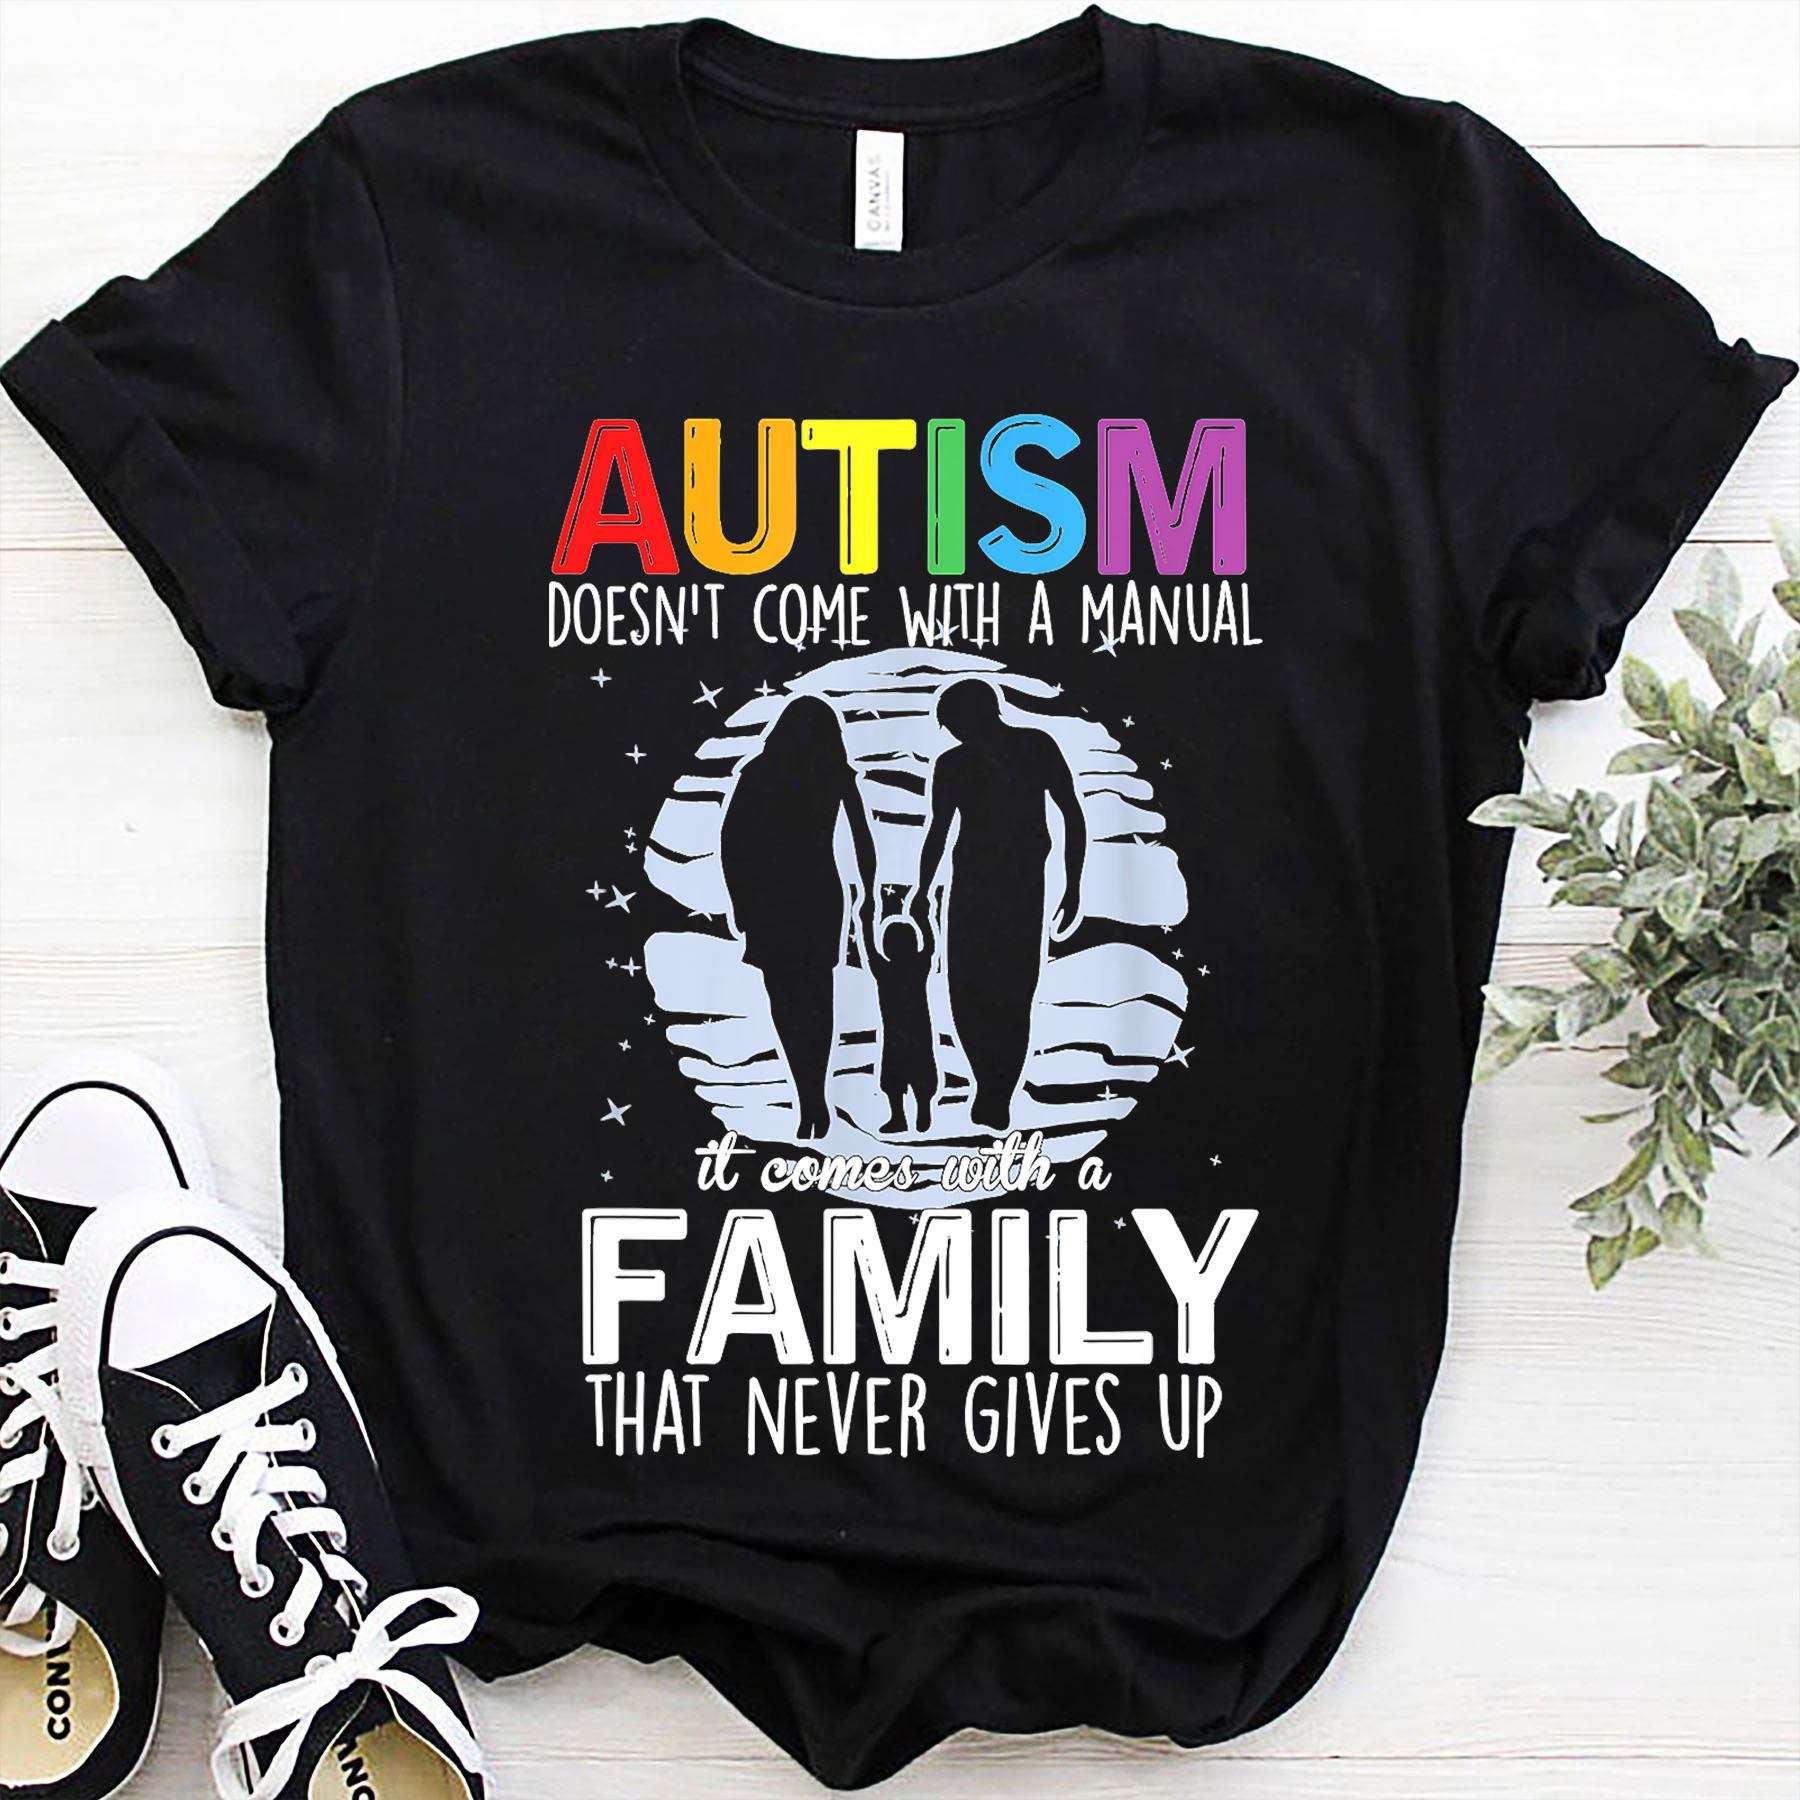 Autism doesn't come with a manual, it comes with a family that never gives up - Autism awareness, autism strong family